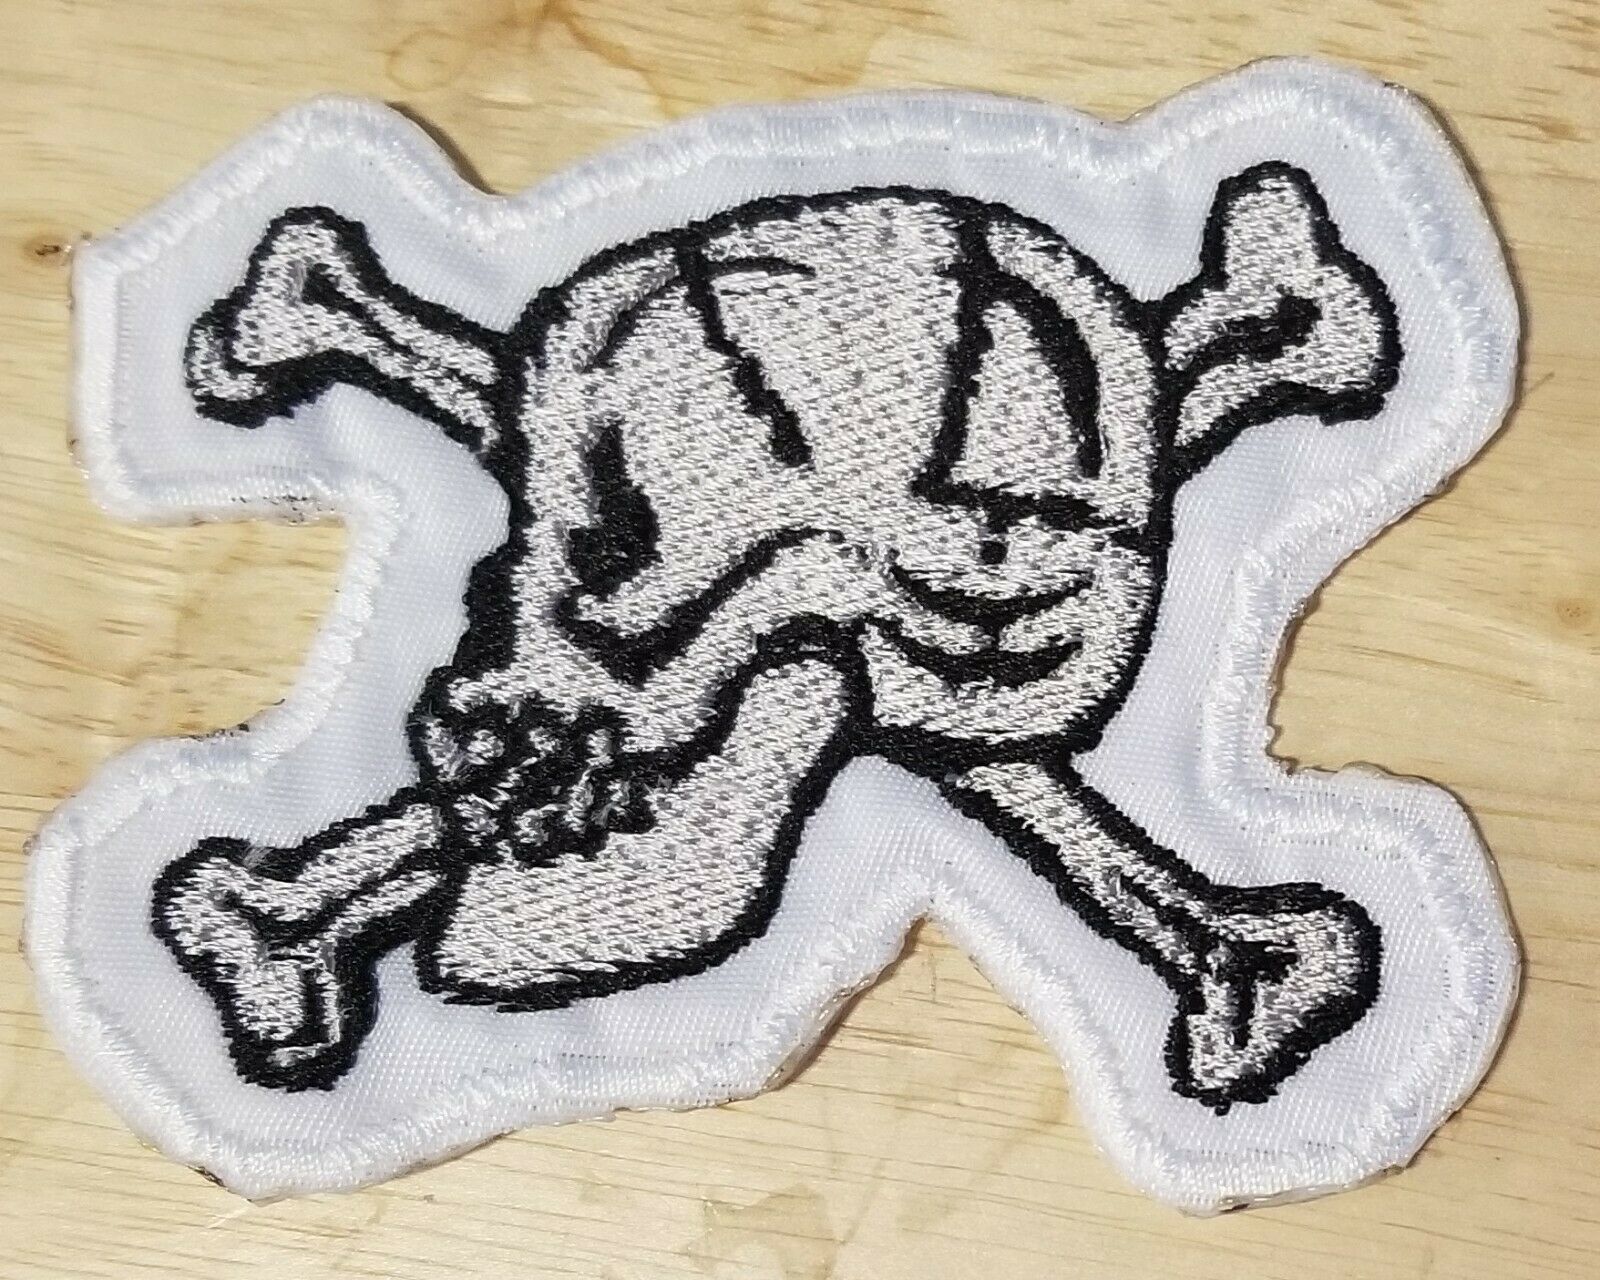 Primary image for Skull & Crossbones Large - The Lost Boys - Sew On/Iron On Patch       10302